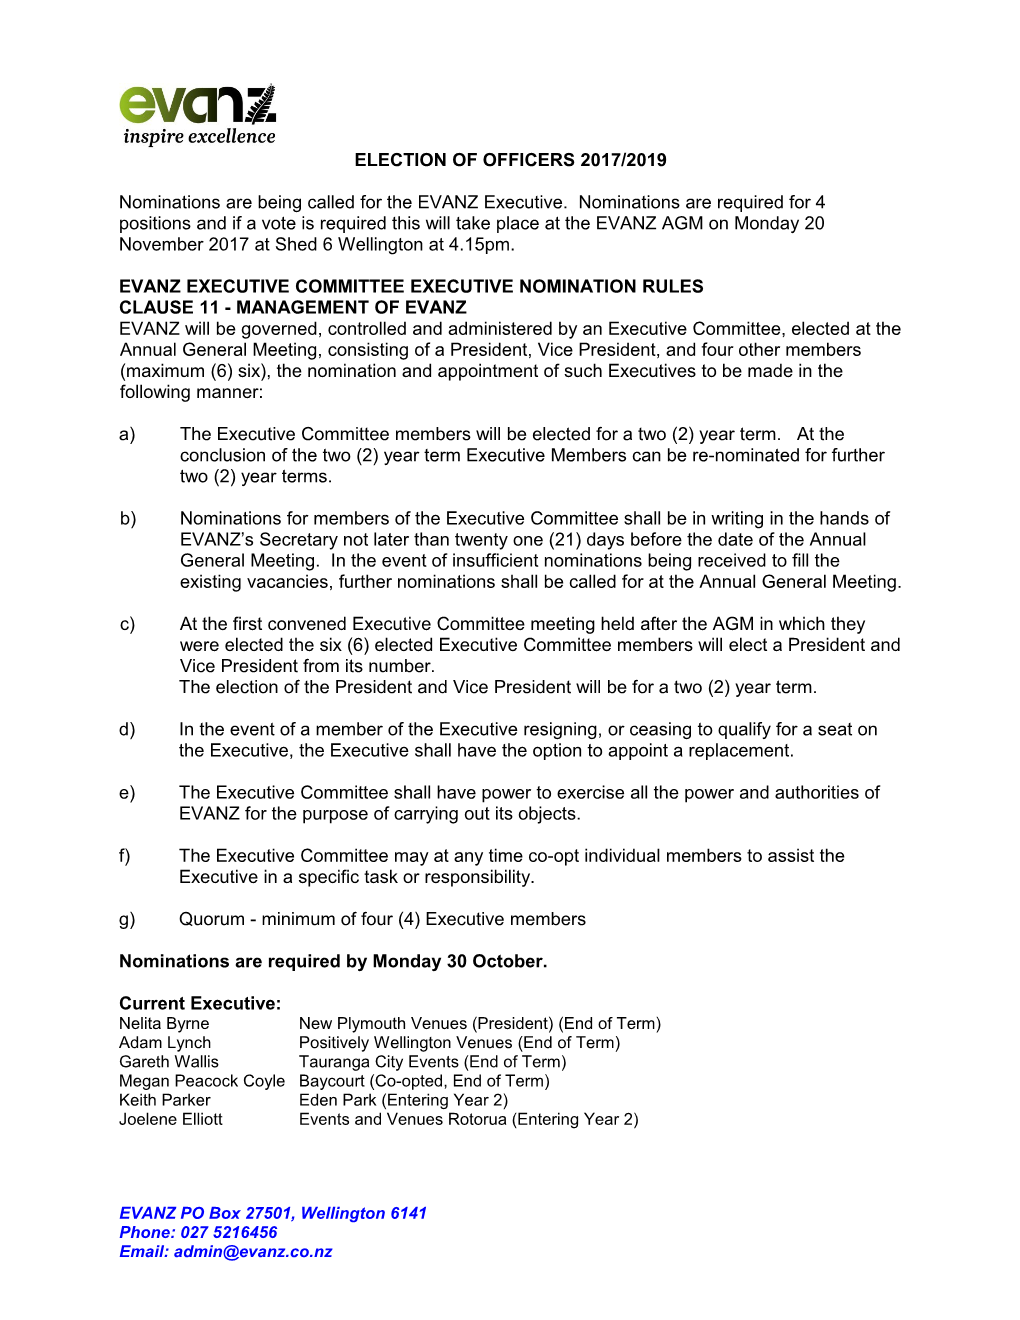 Evanz Executive Committee Executive Nomination Rules